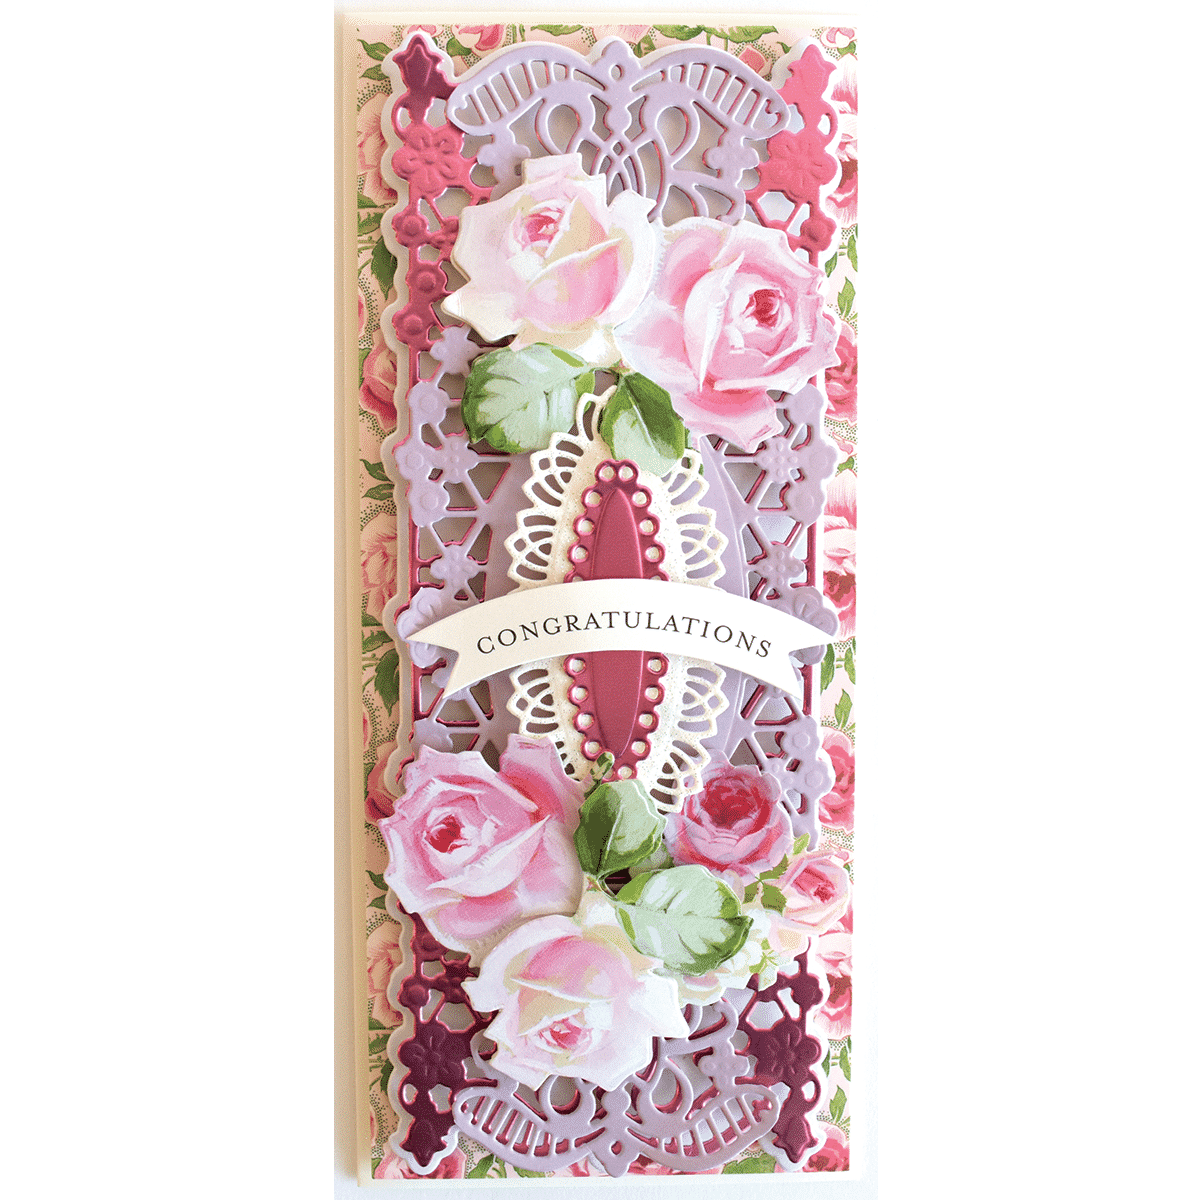 a congratulations card with pink roses and lace.